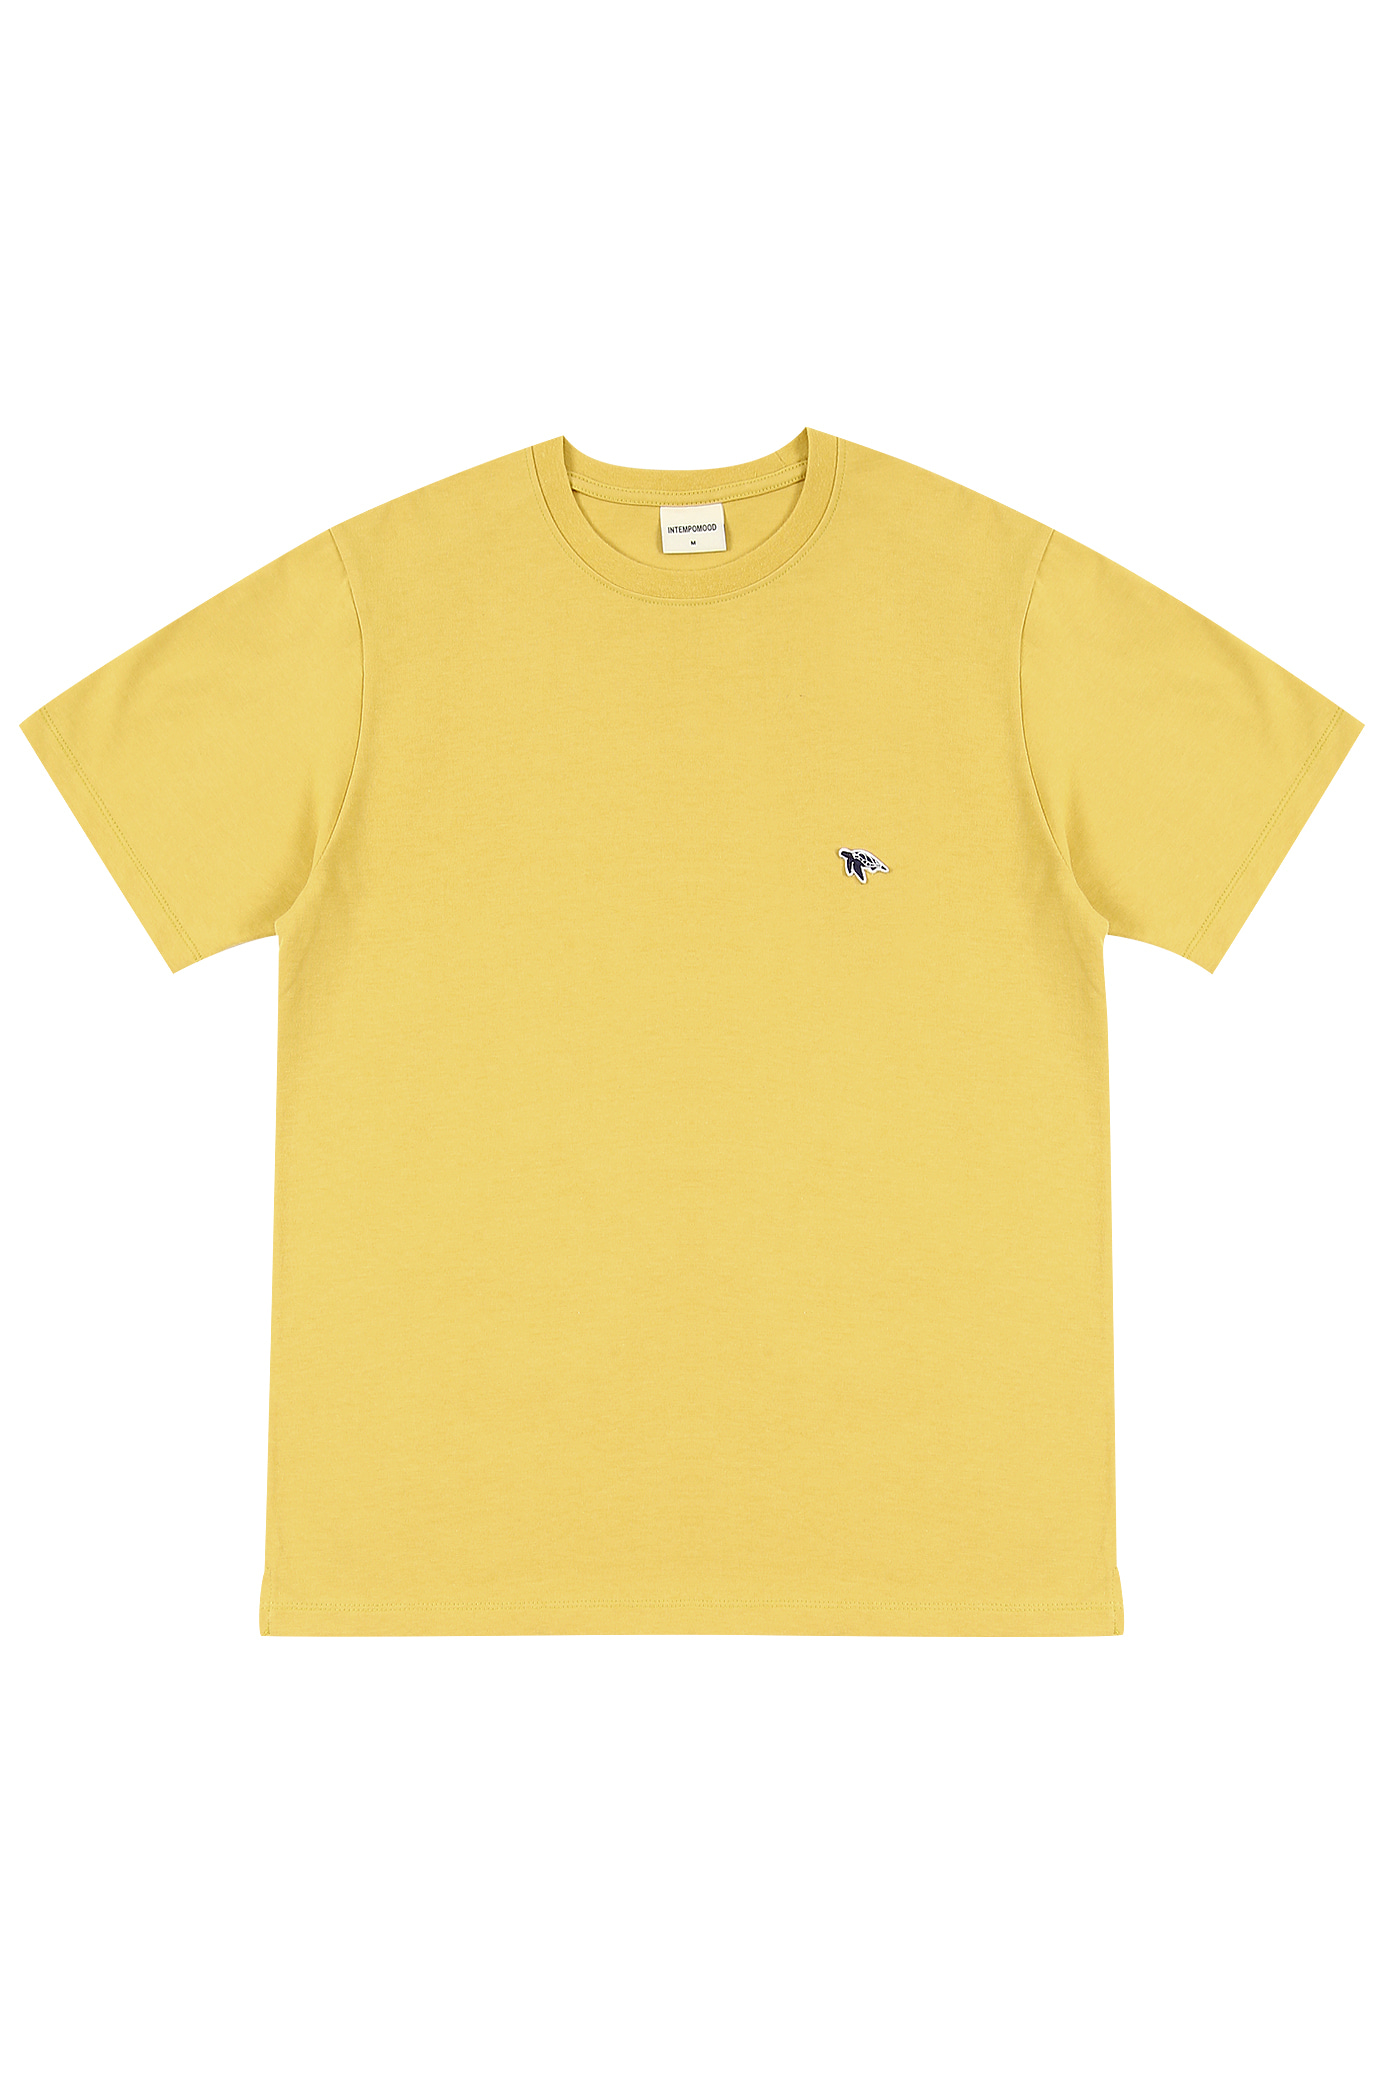 Turtle Patches T-shirt_Mustard